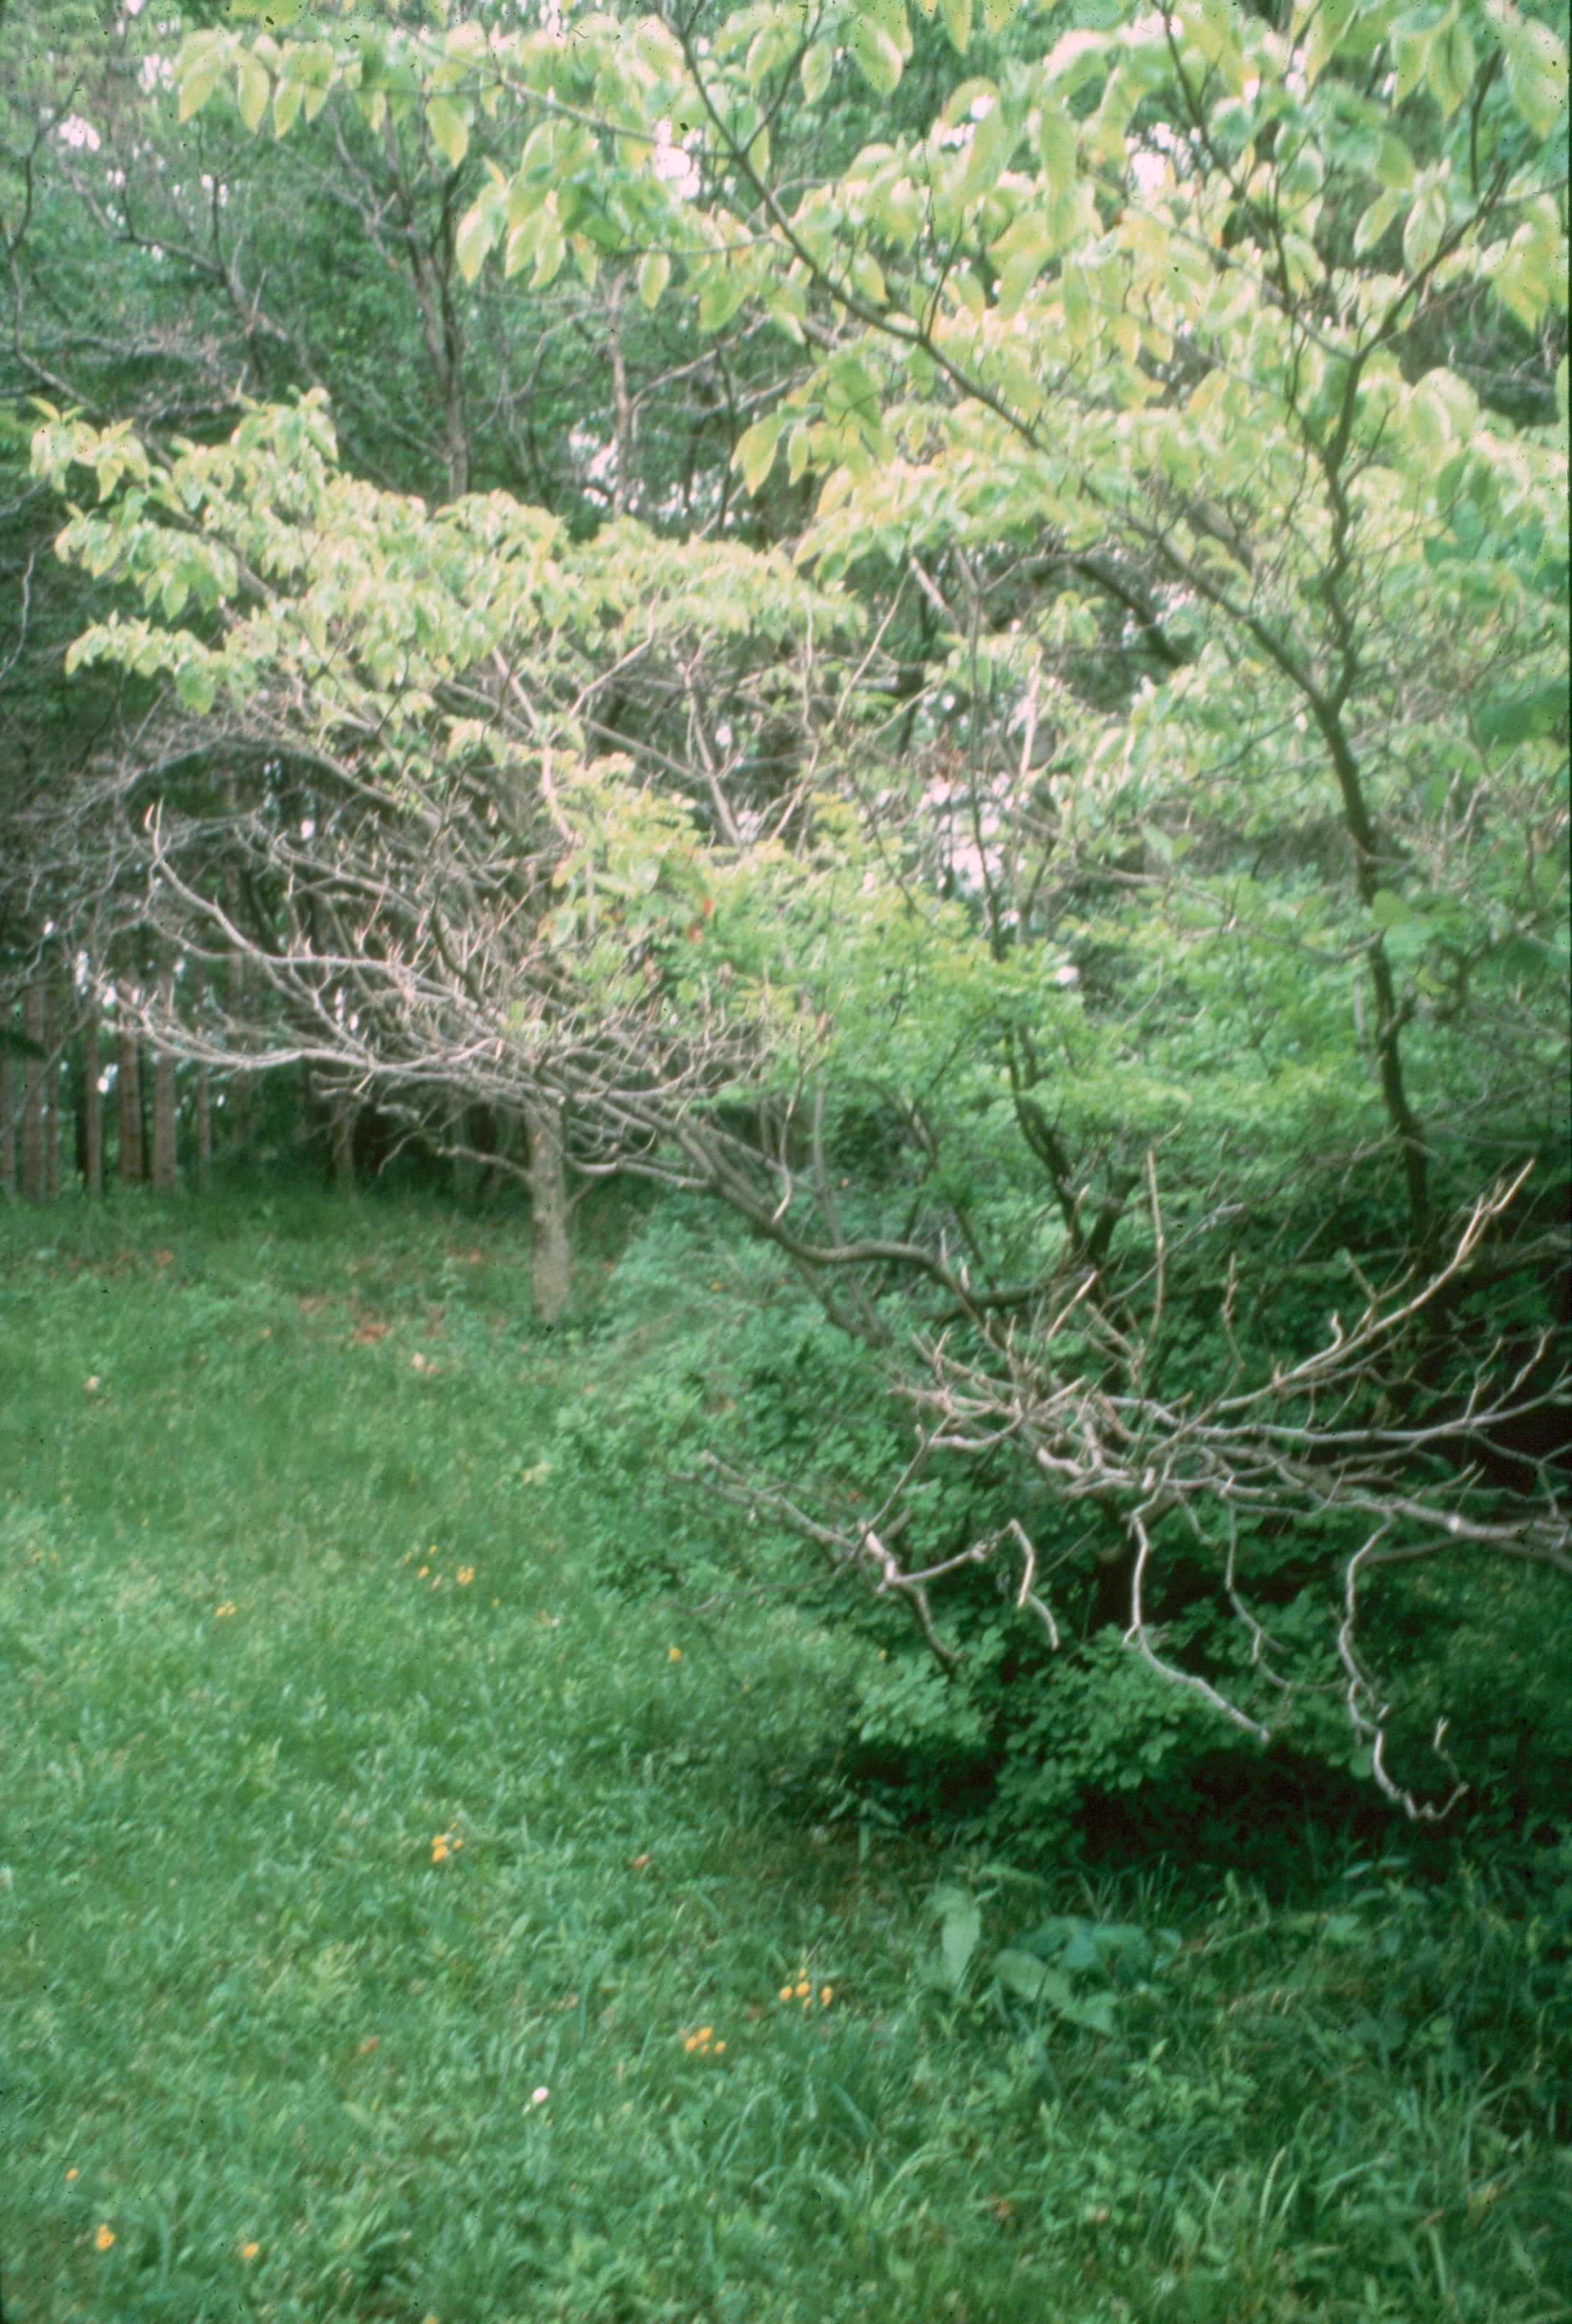 Image of Progressive dieback of branches up on the tree